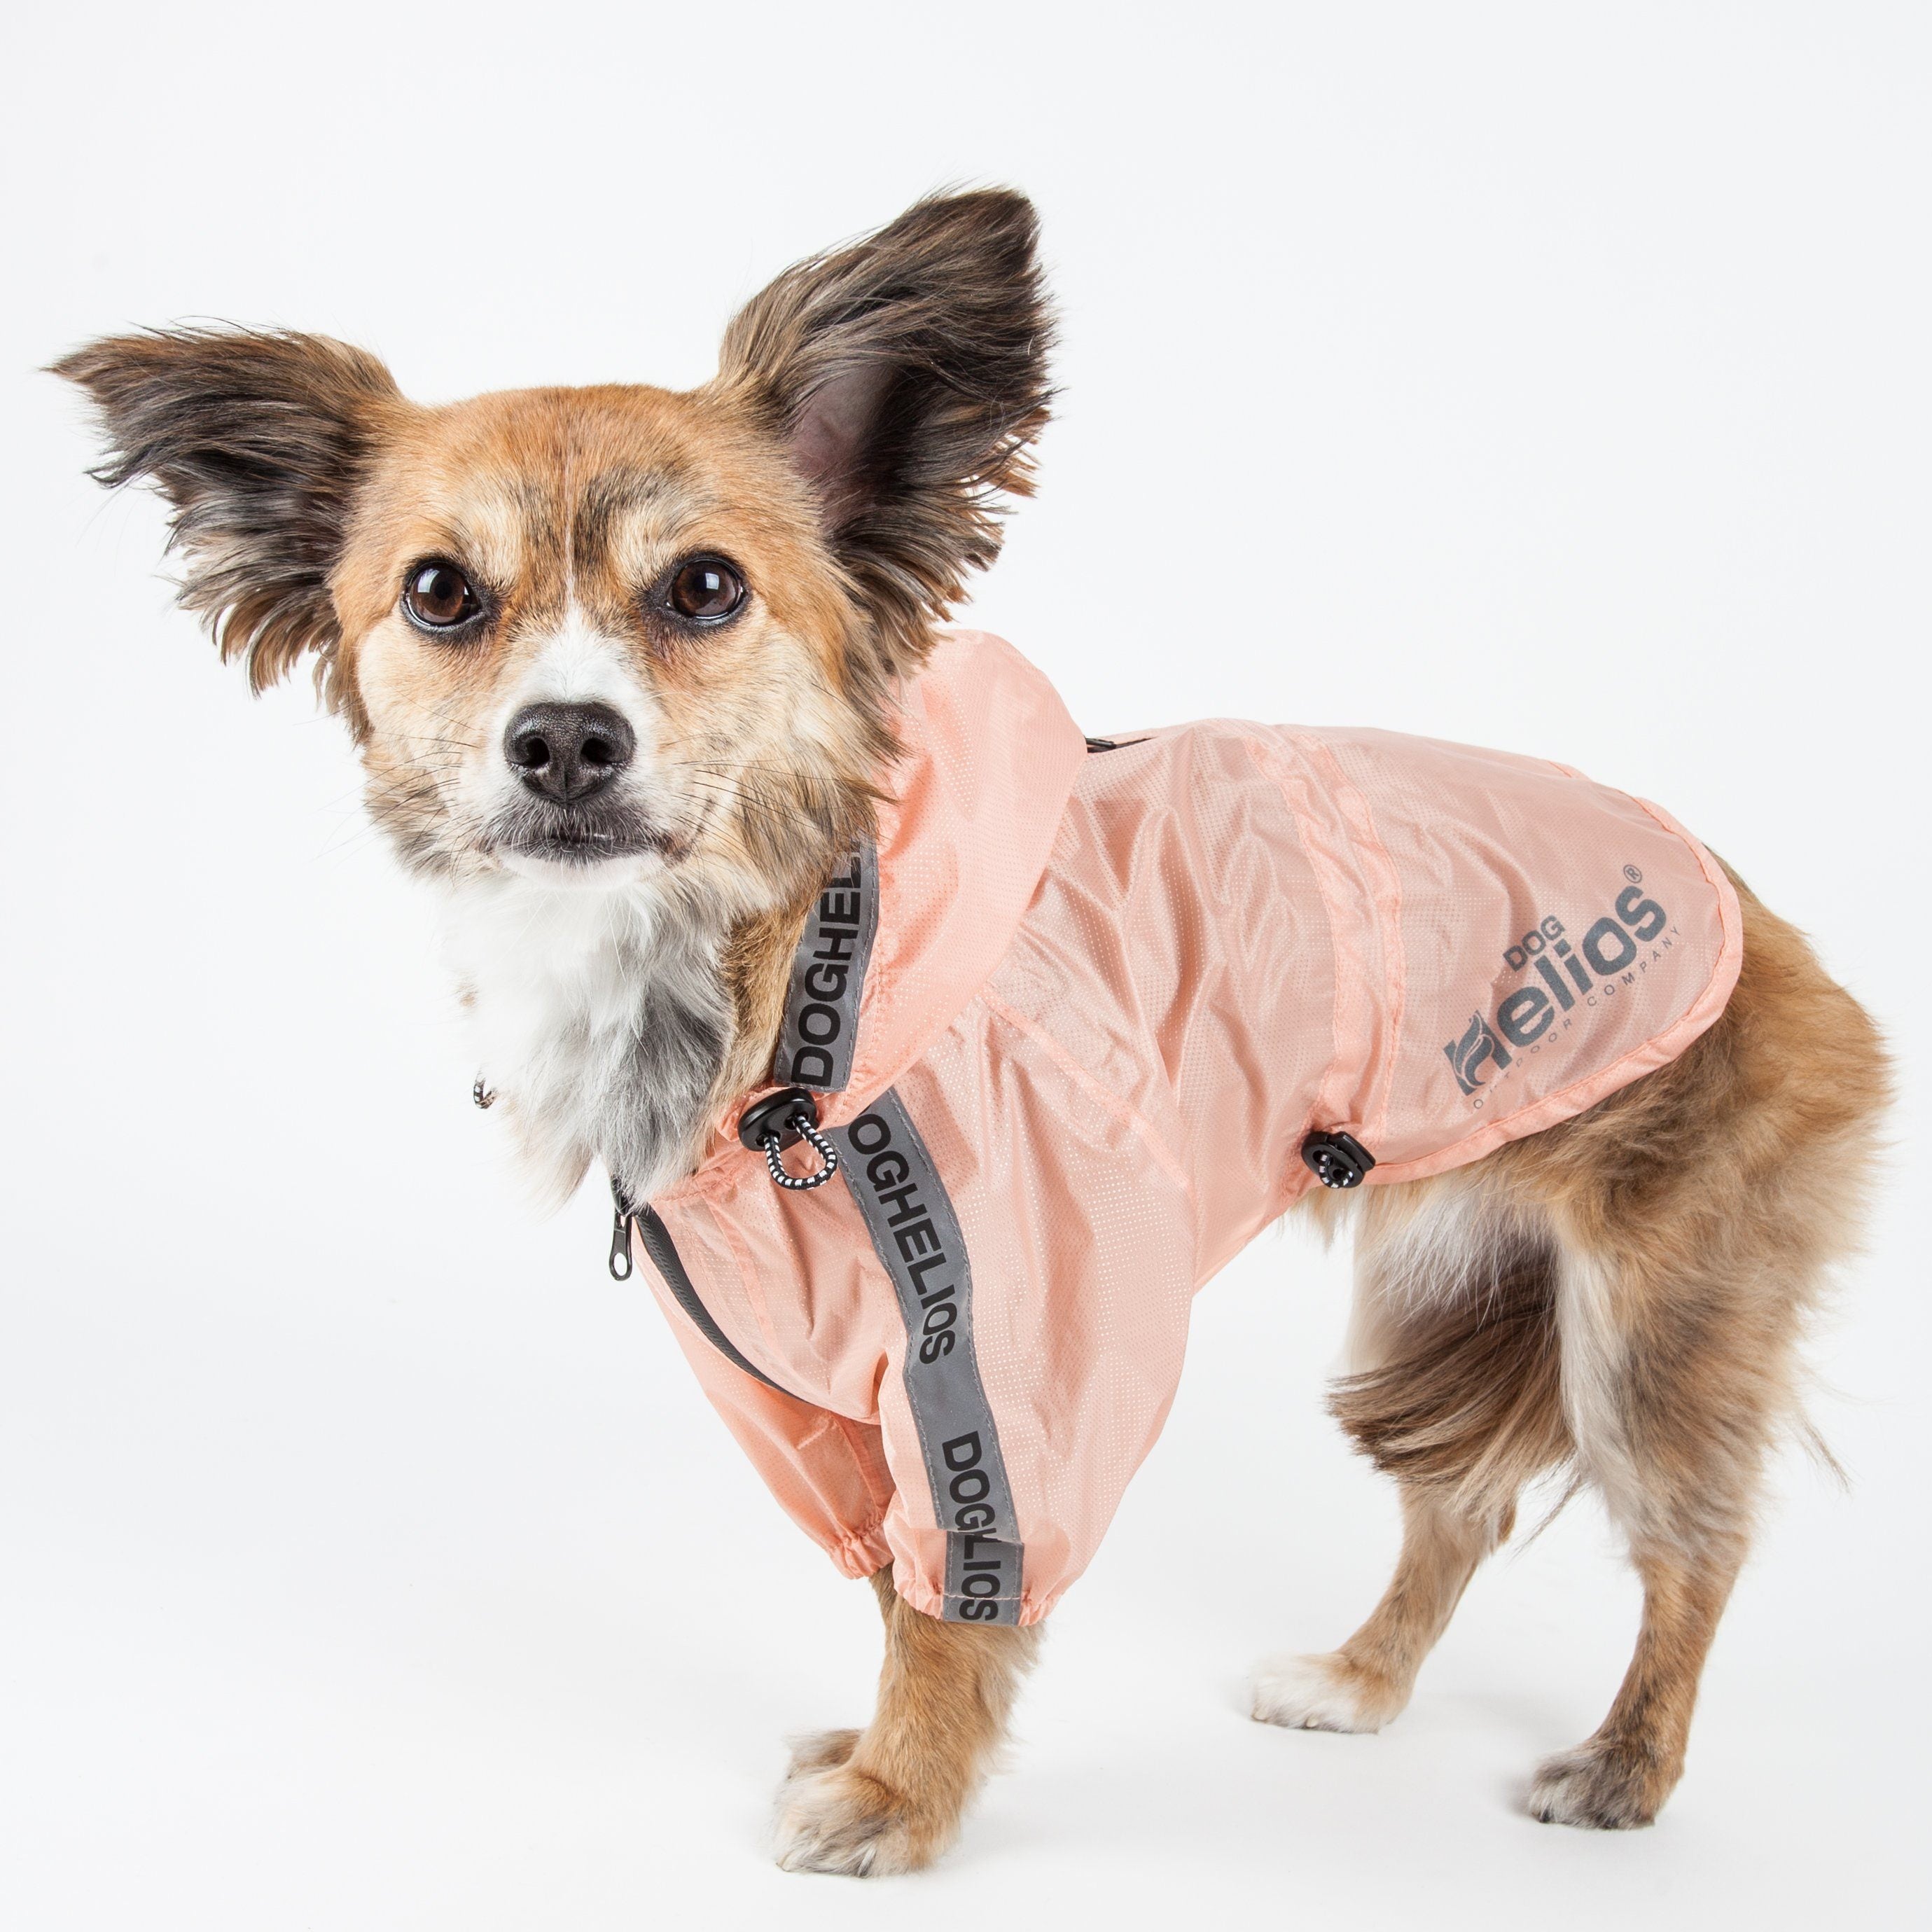 Dog Helios ® 'Torrential Shield' Adjustable and Waterproof Dog Raincoat Poncho X-Small Peach